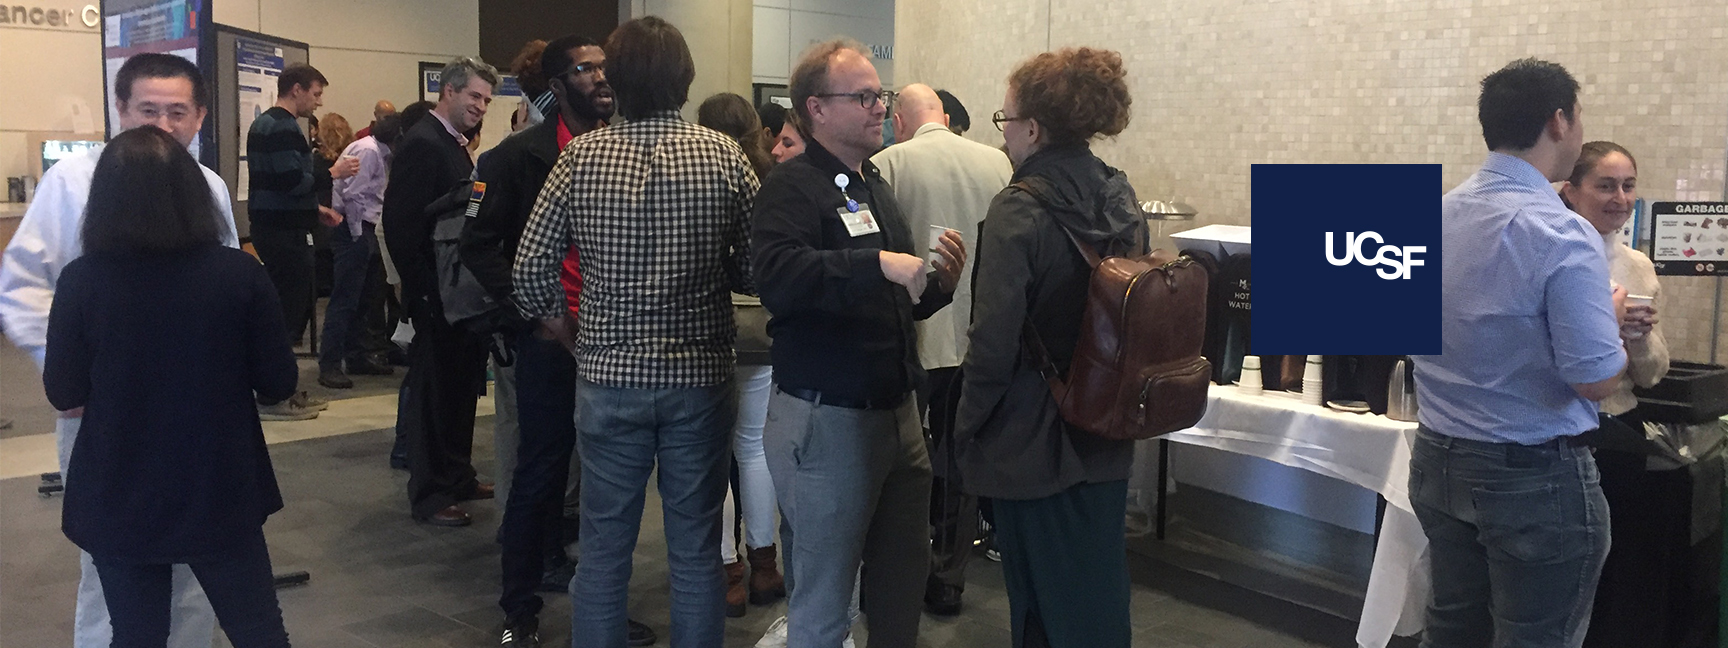 Attendees networking at the Pain and Addiction Research Retreat on December 4, 2019